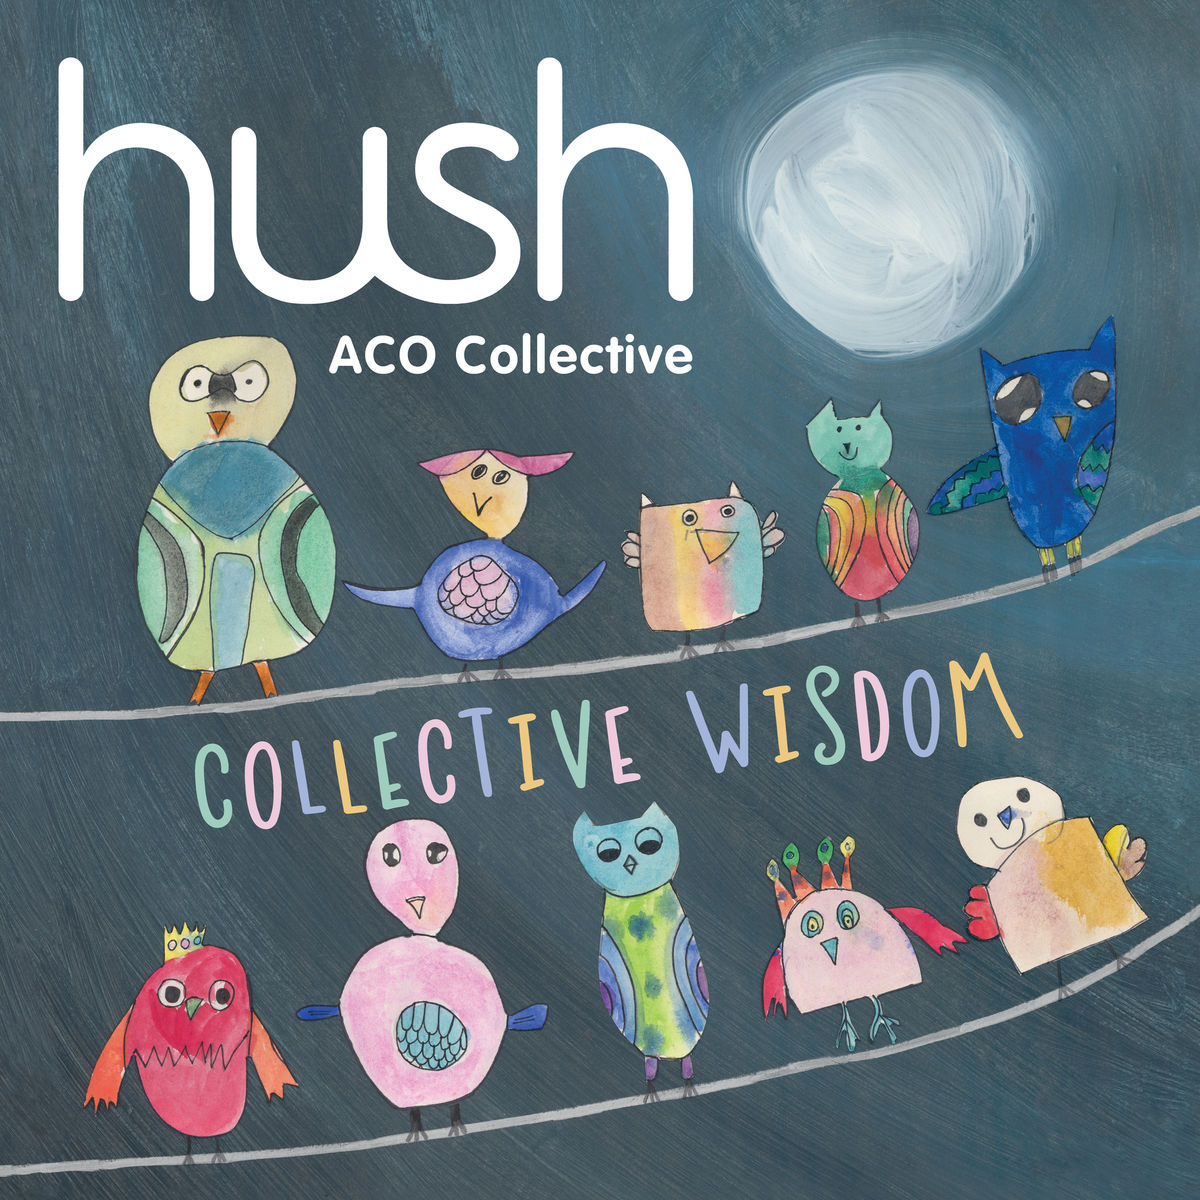 ACO Collective – Collective Wisdom (The Hush Collection, Vol. 18) (2018) [FLAC 24bit/96kHz]